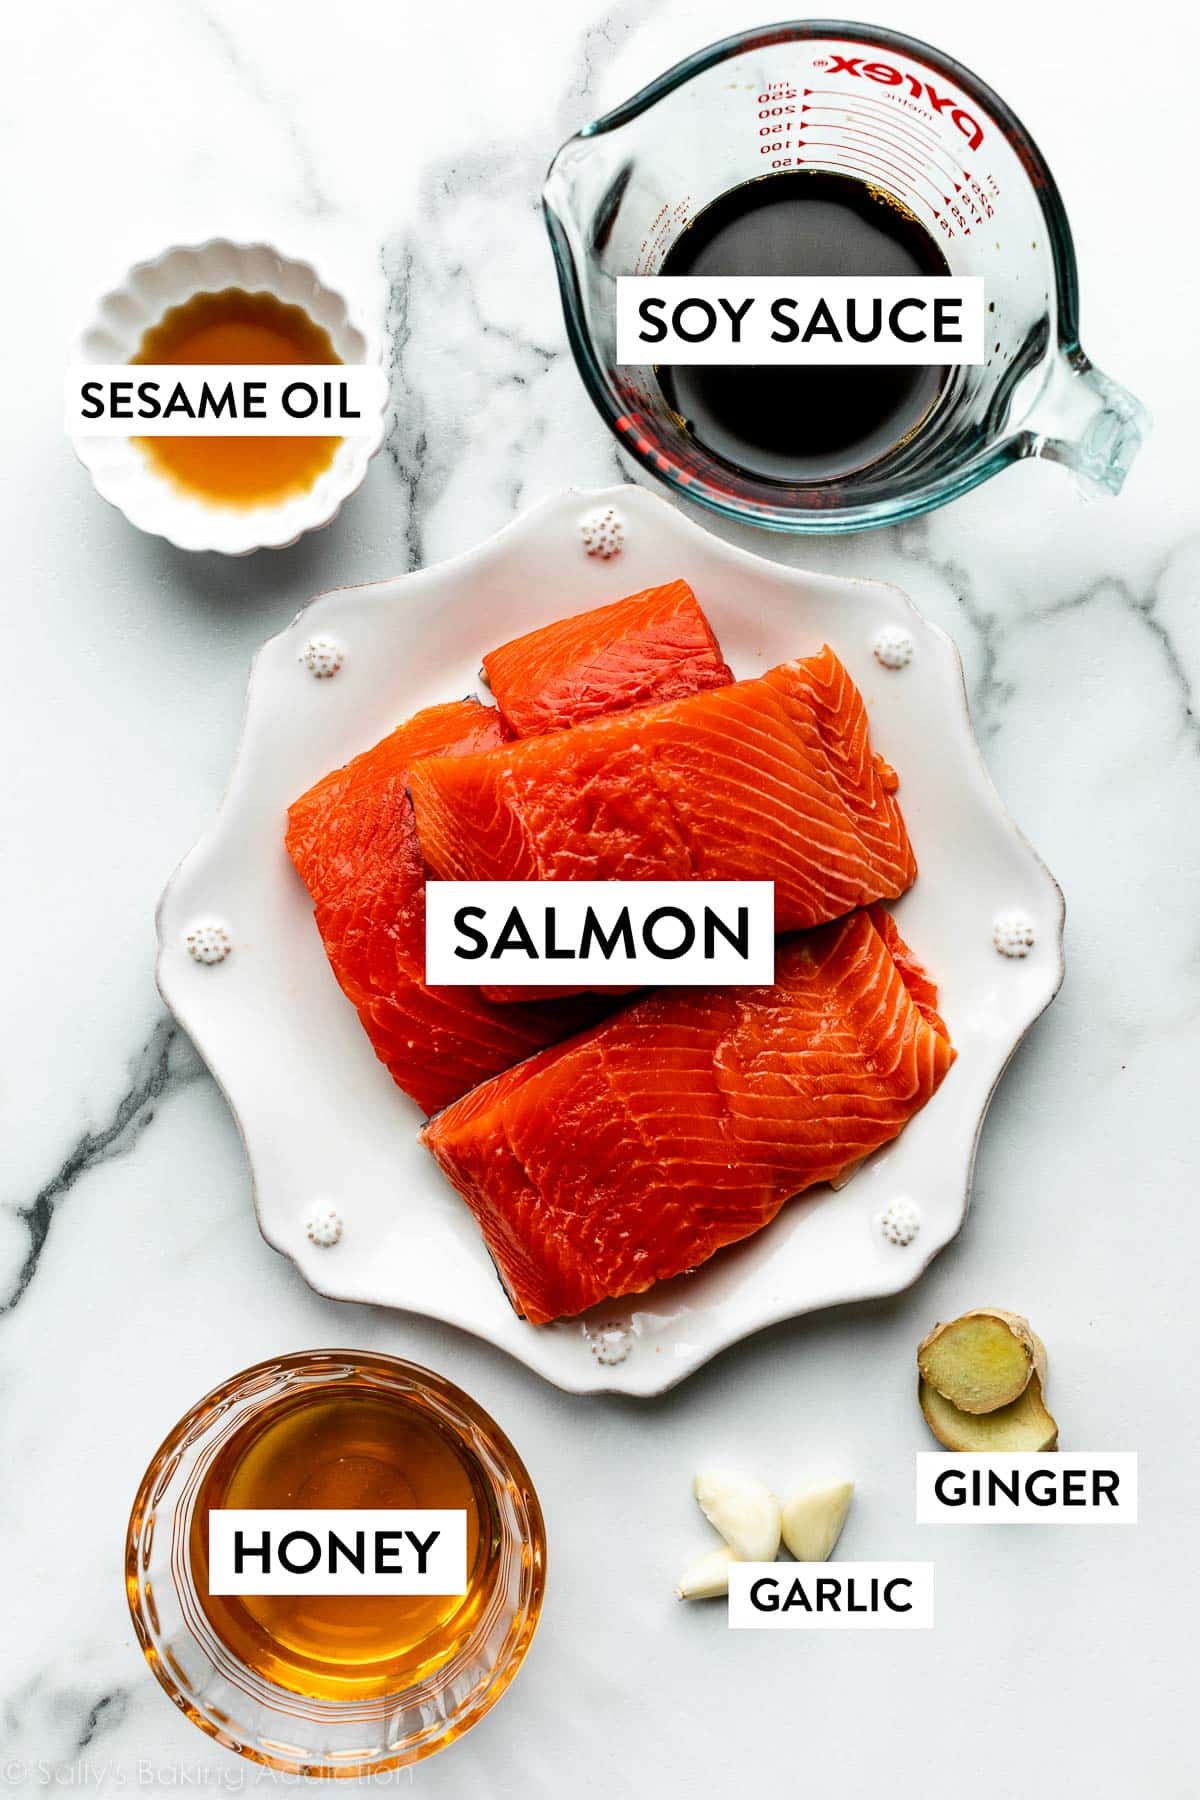 salmon on white plate with ingredients arranged around it including soy sauce, sesame oil, fresh ginger, garlic, and honey.